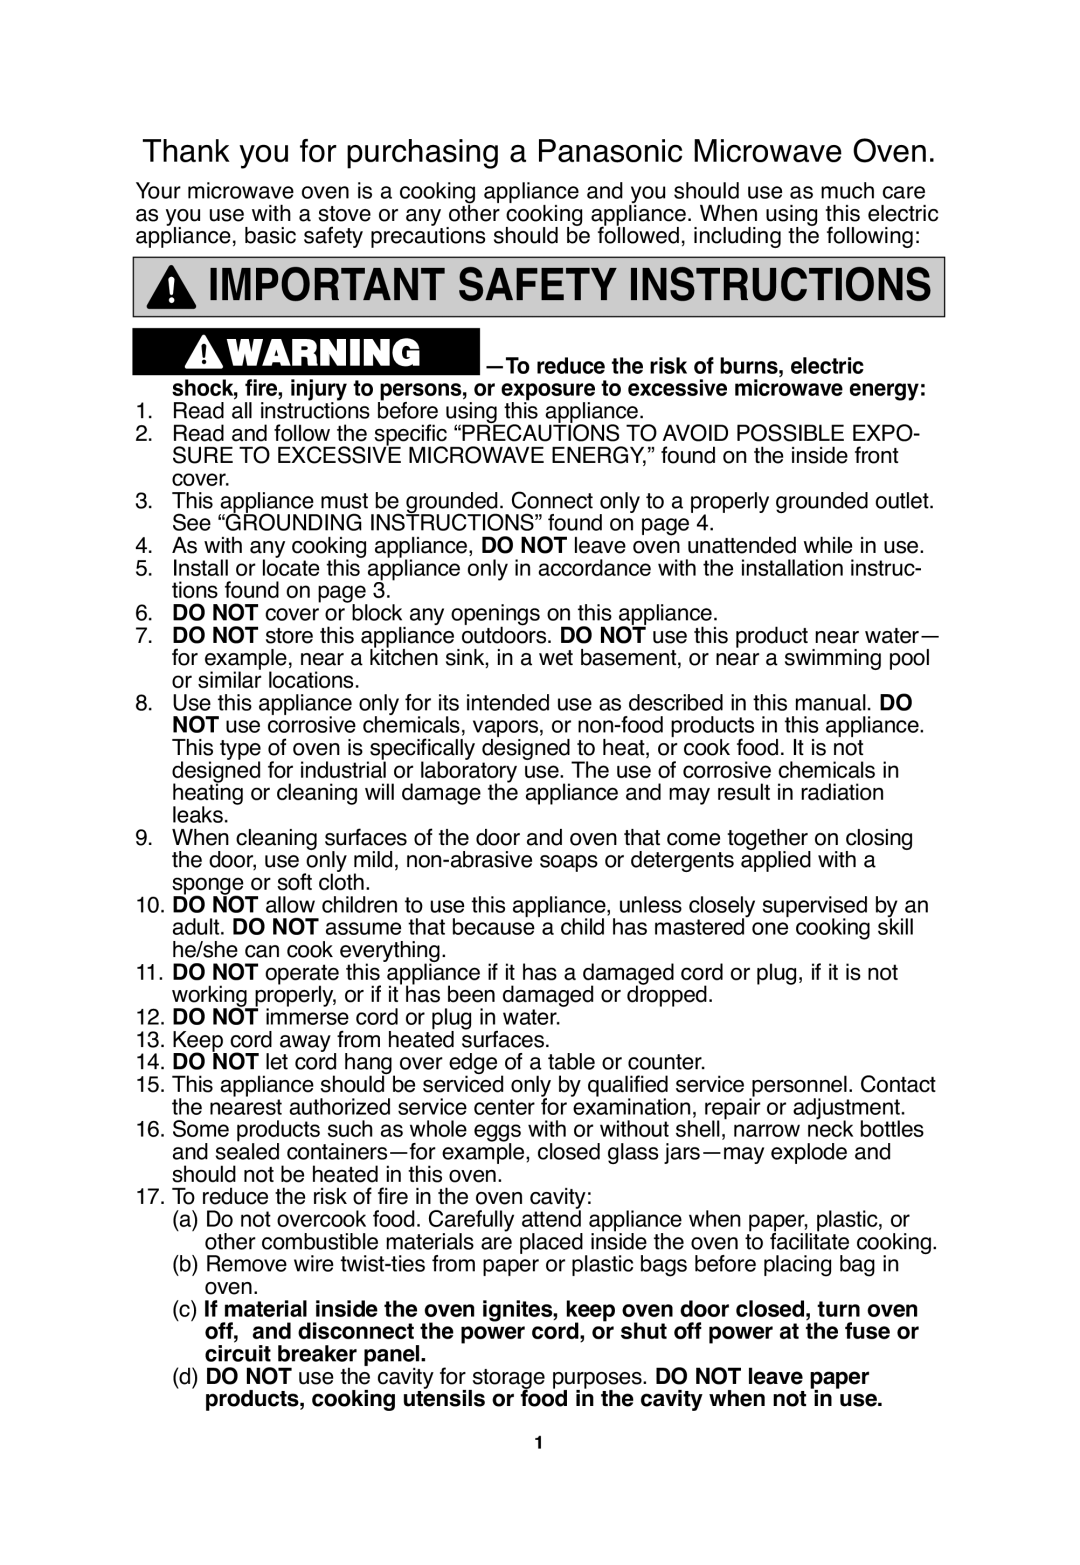 Panasonic NN-T655, NN-T665, NN-SN656 Important Safety Instructions, Thank you for purchasing a Panasonic Microwave Oven 